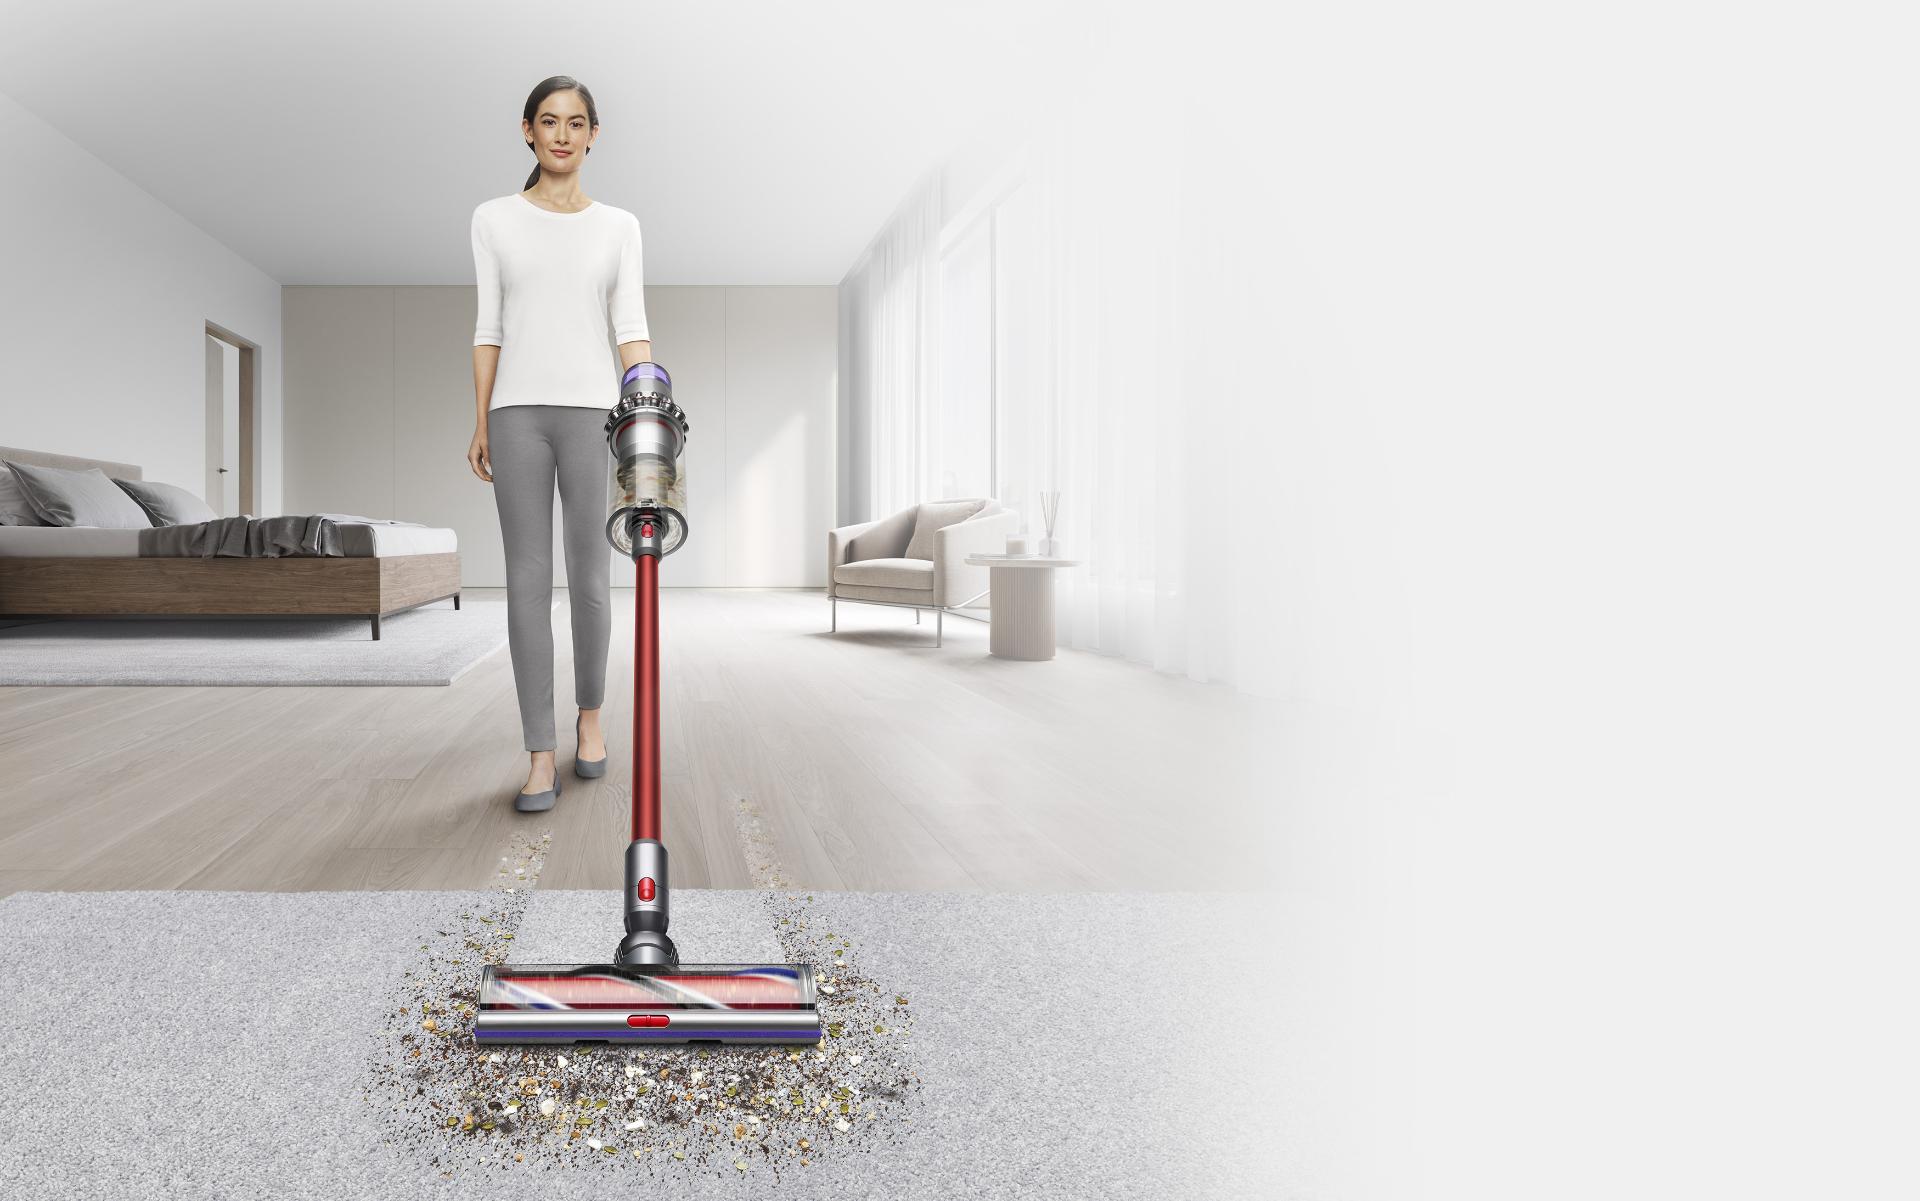 Video of Dyson Outsize vacuum cleaning a carpet